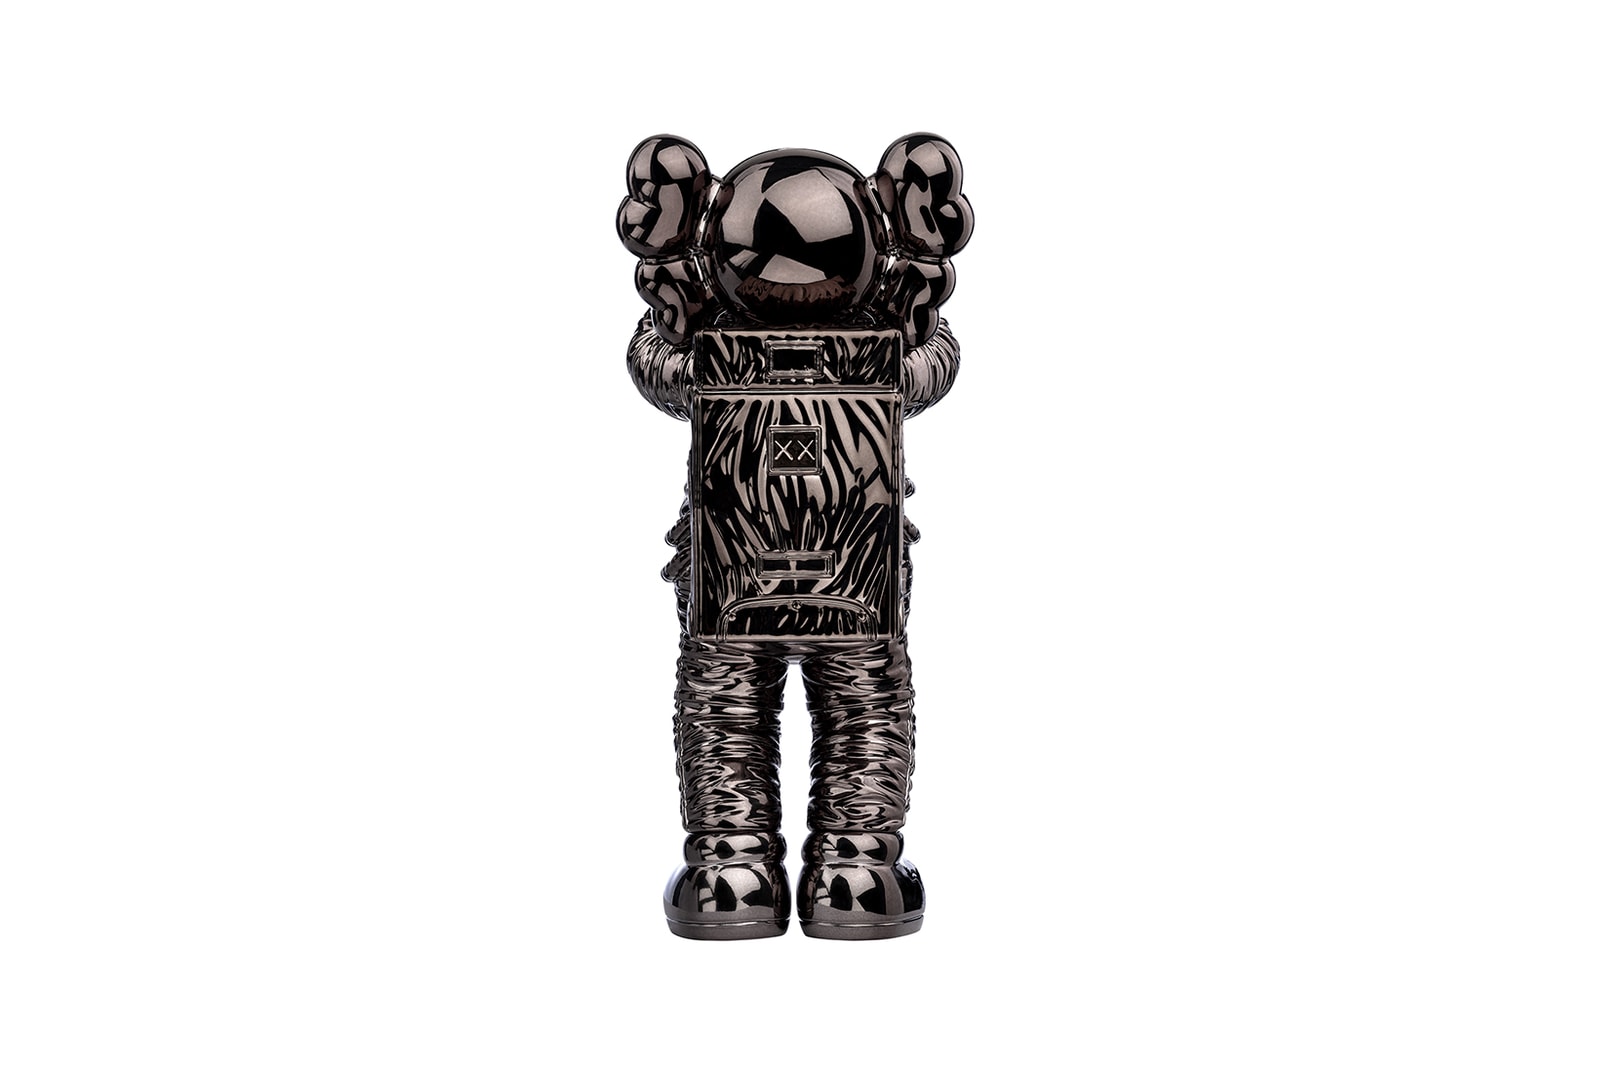 kaws holiday space allrightsreserved collaboration companion figure collectibles gold sculpture 